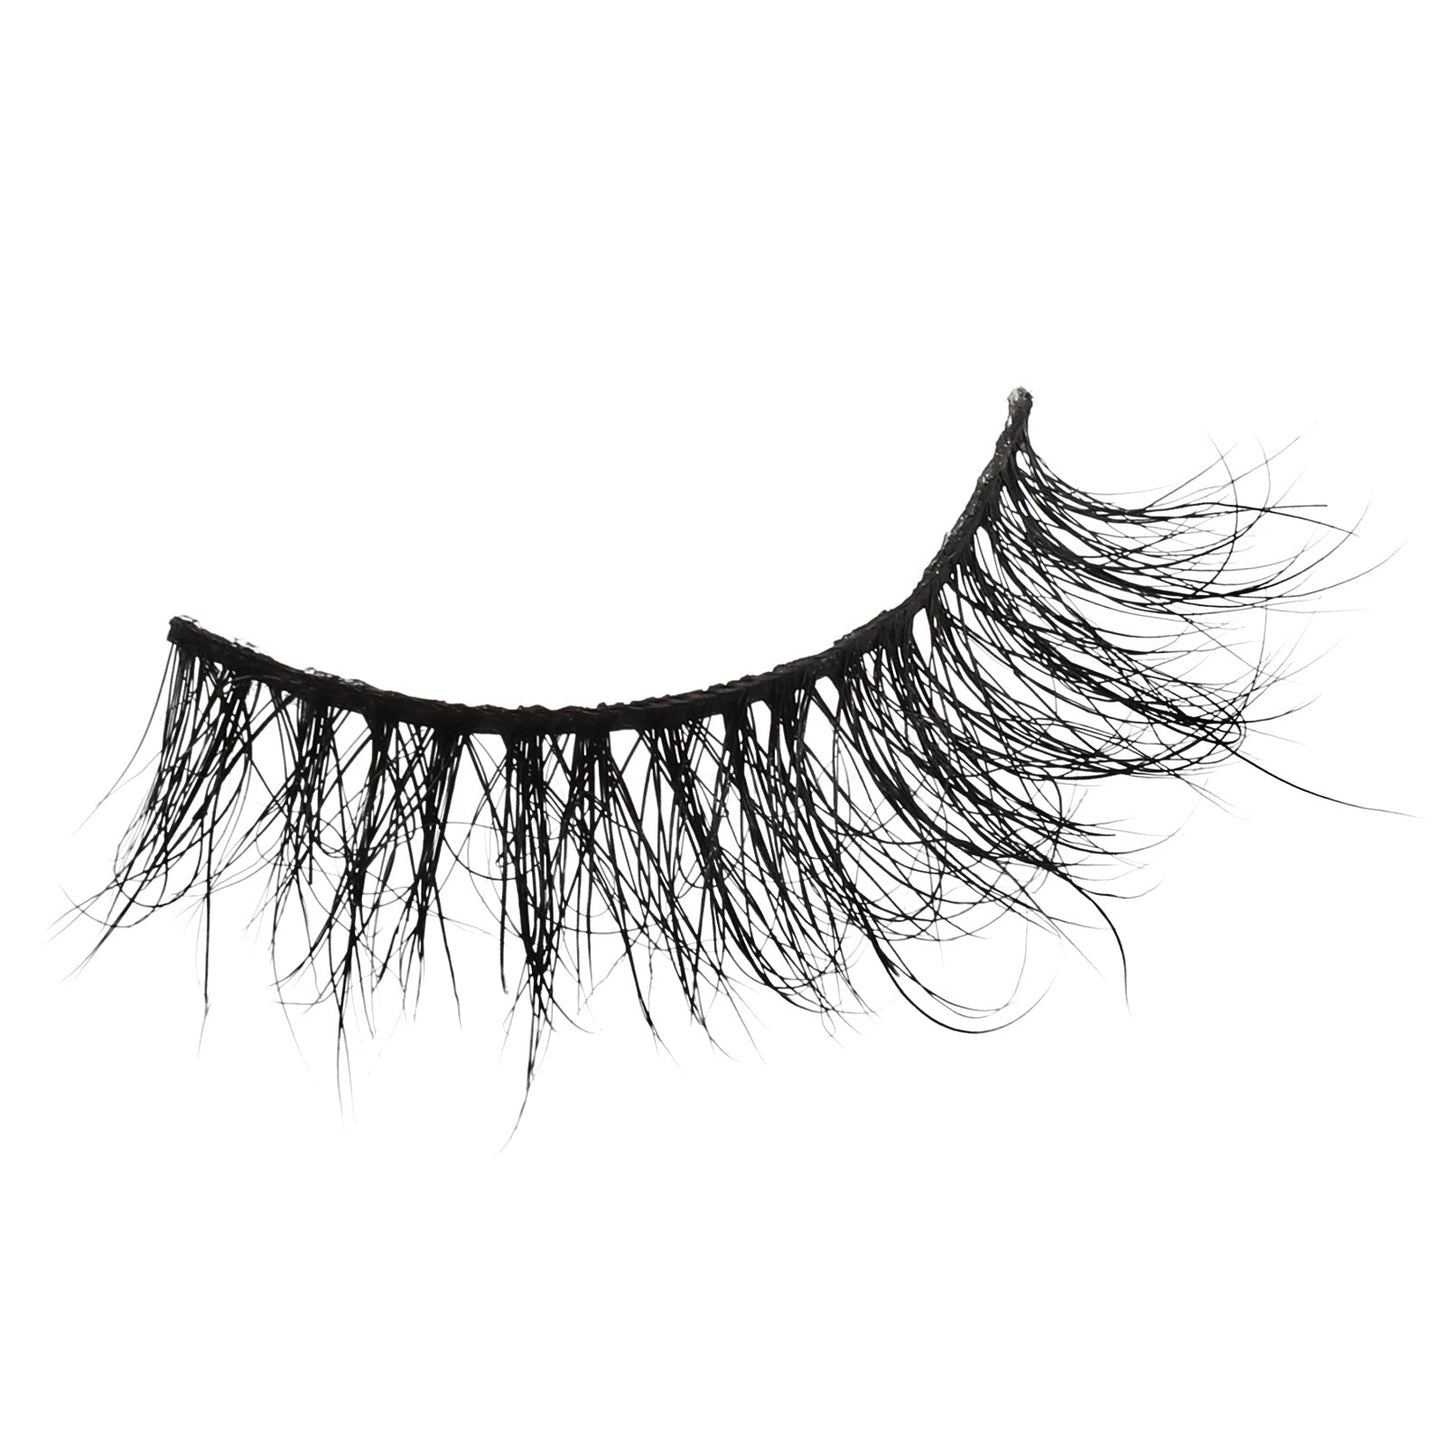 3D Mink Eyelashes - Made for This